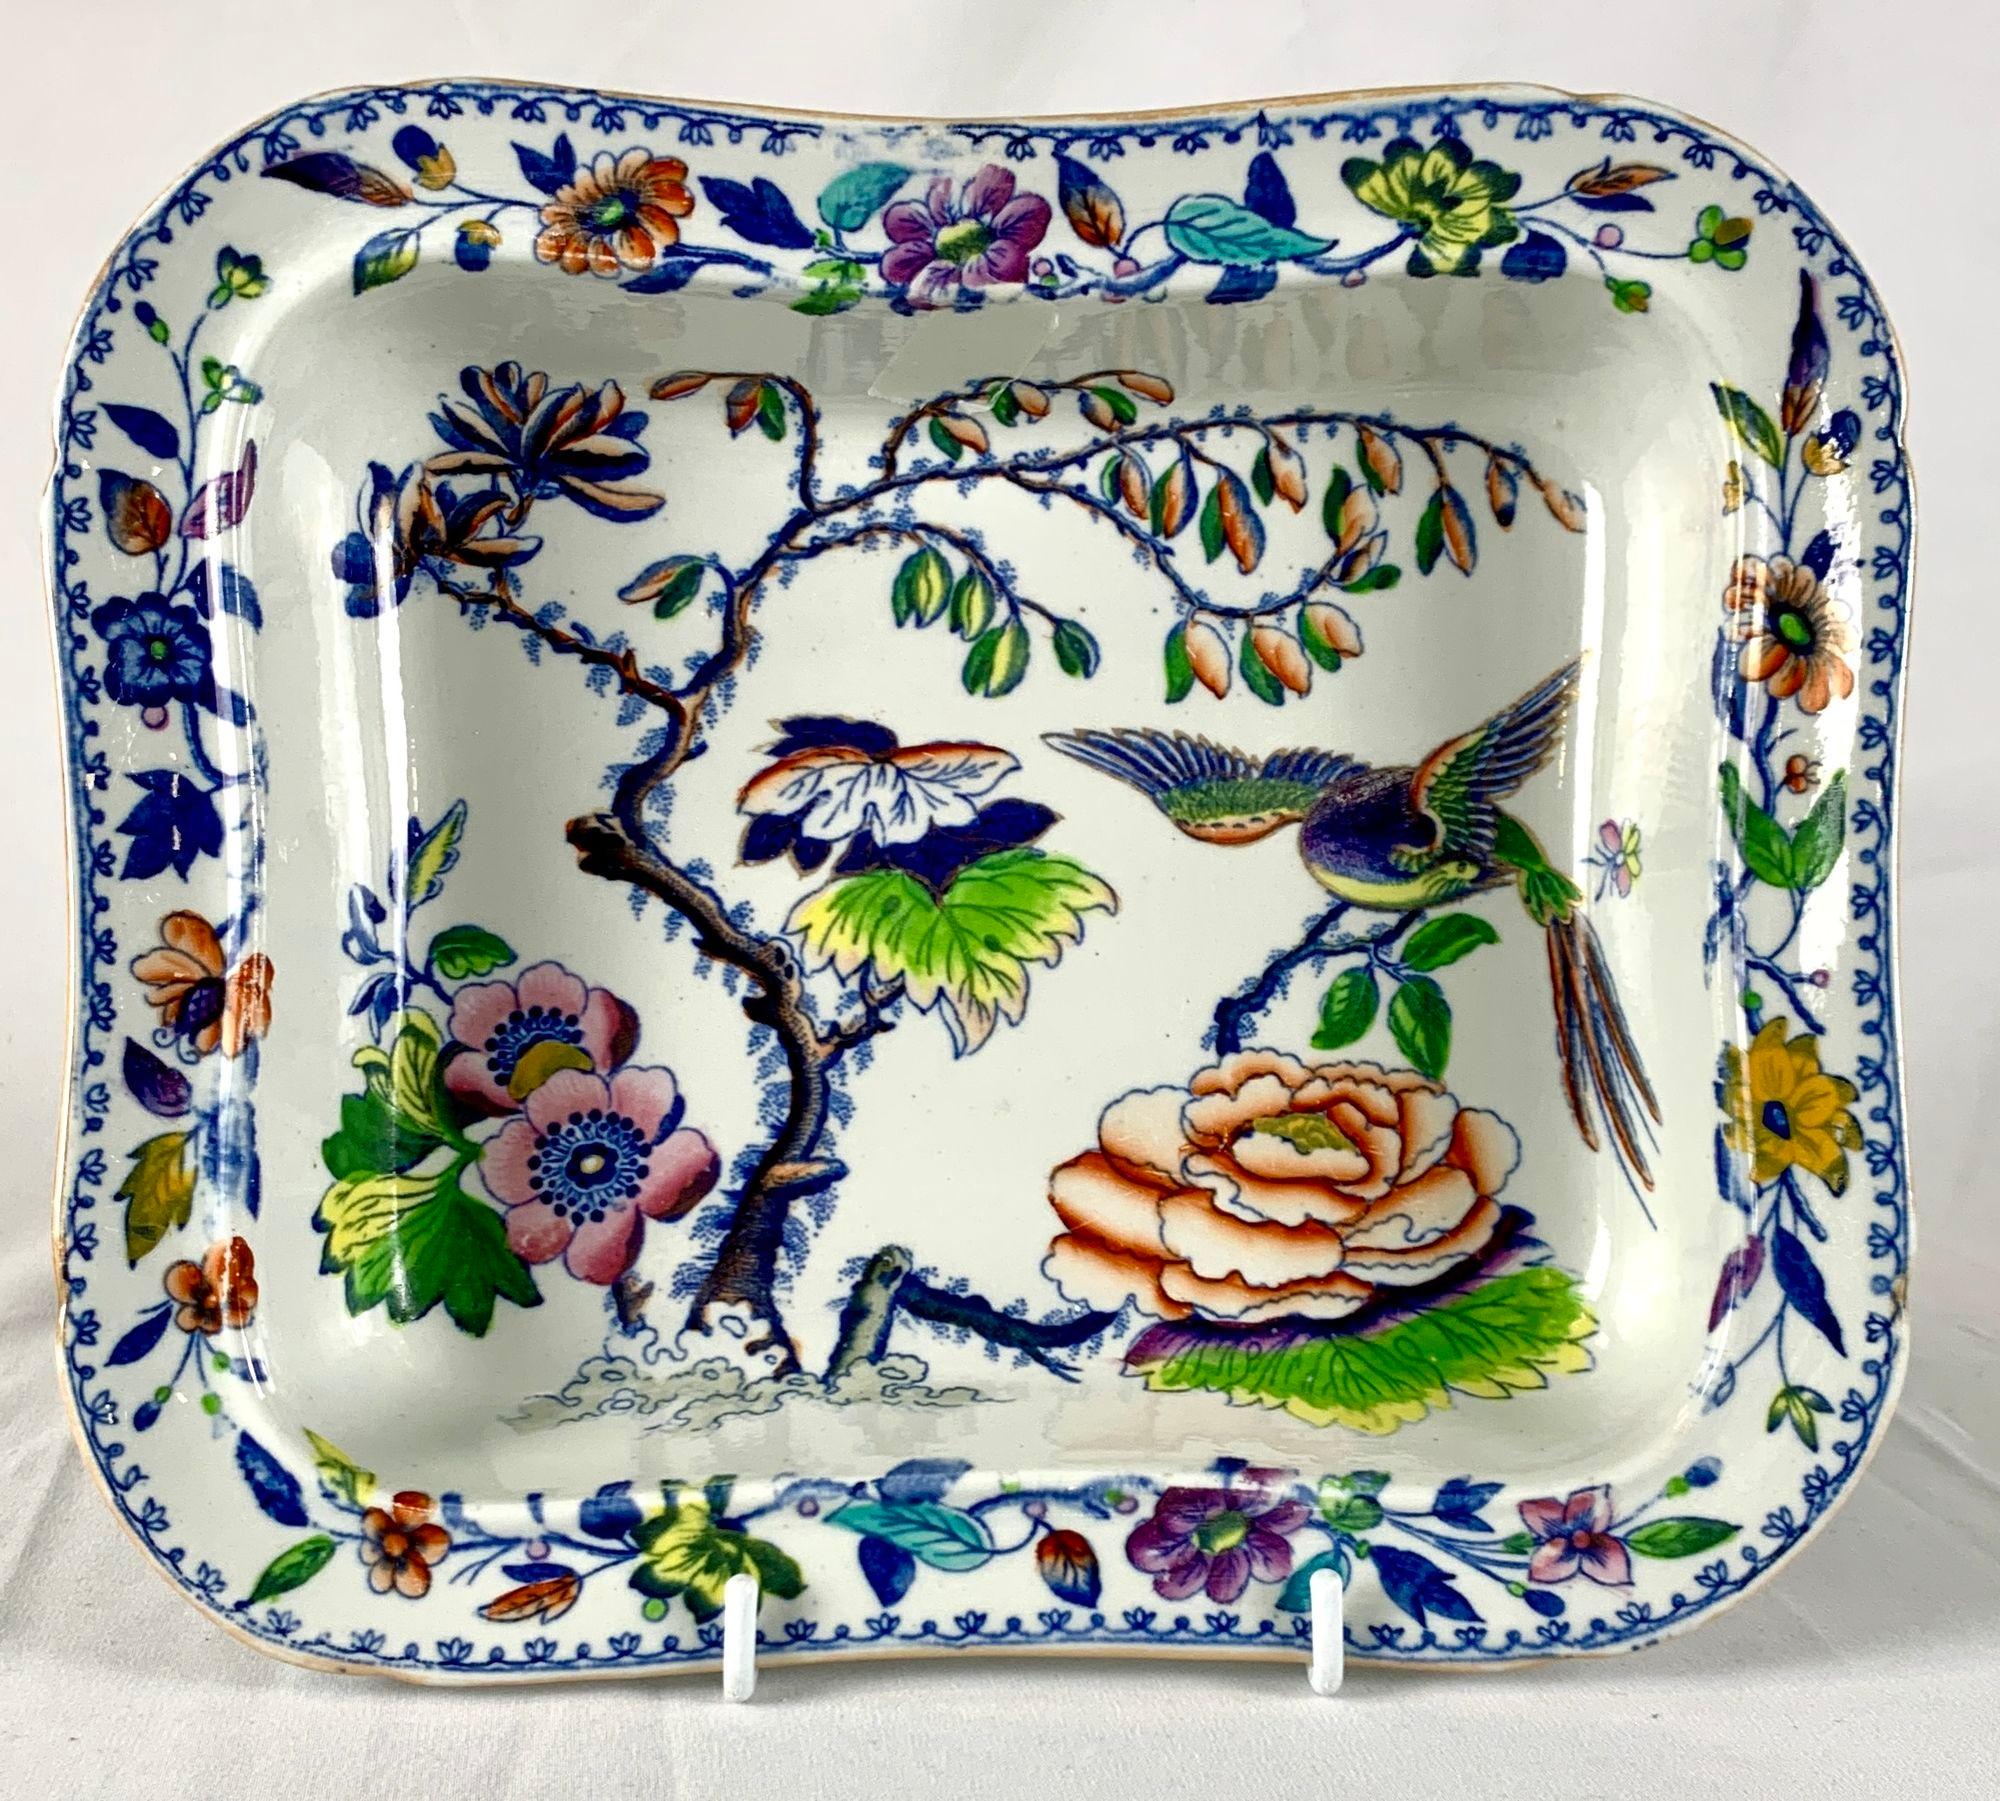 This pair of rectangular dishes is decorated in the Flying Bird pattern.
The pattern features a beautiful long-tailed bird flying over a garden and flowers in rainbow colors.
It is painted in a unique combination of purple, pink, yellow, orange,